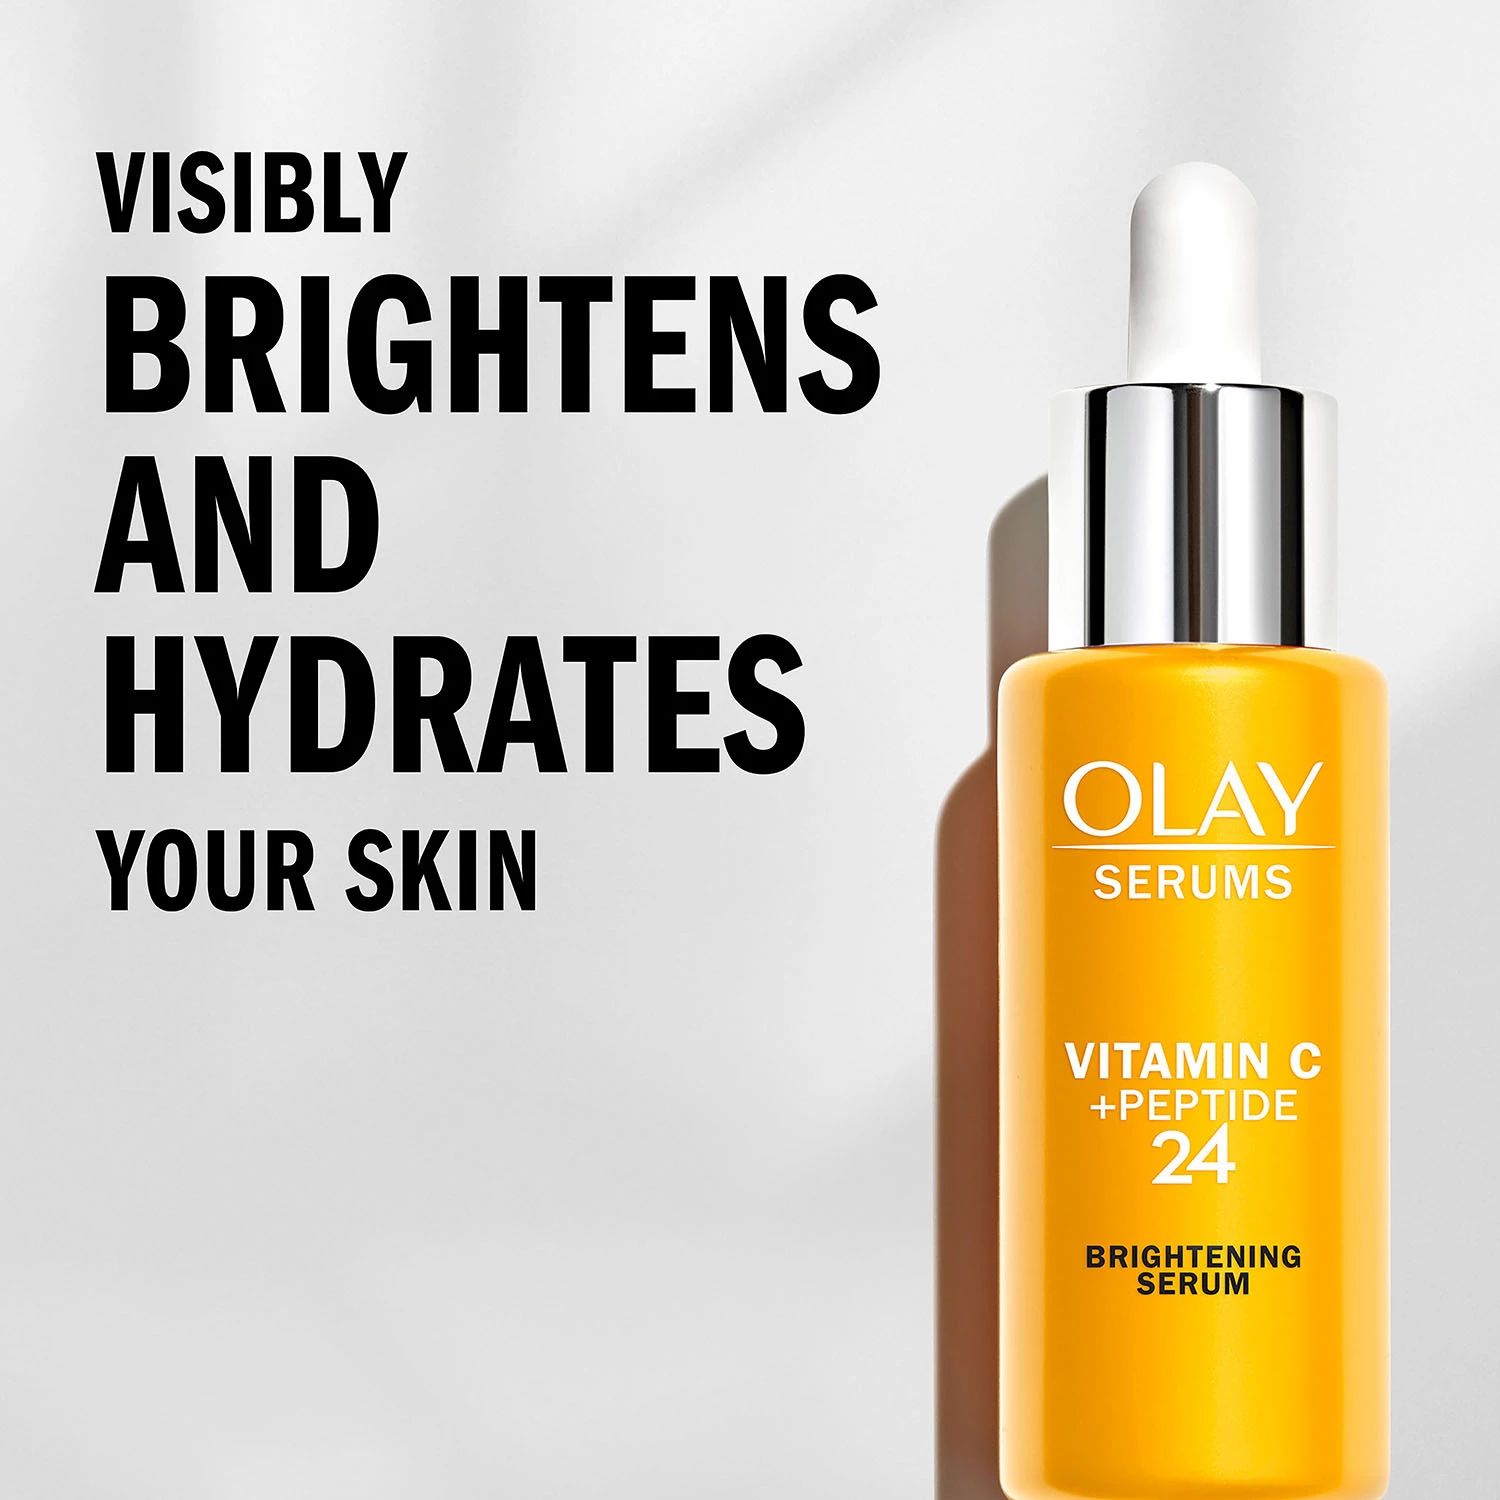 Olay Vitamin C + Peptide 24 Serum, 1.3 Ounce (Pack of 2) - image 3 of 5